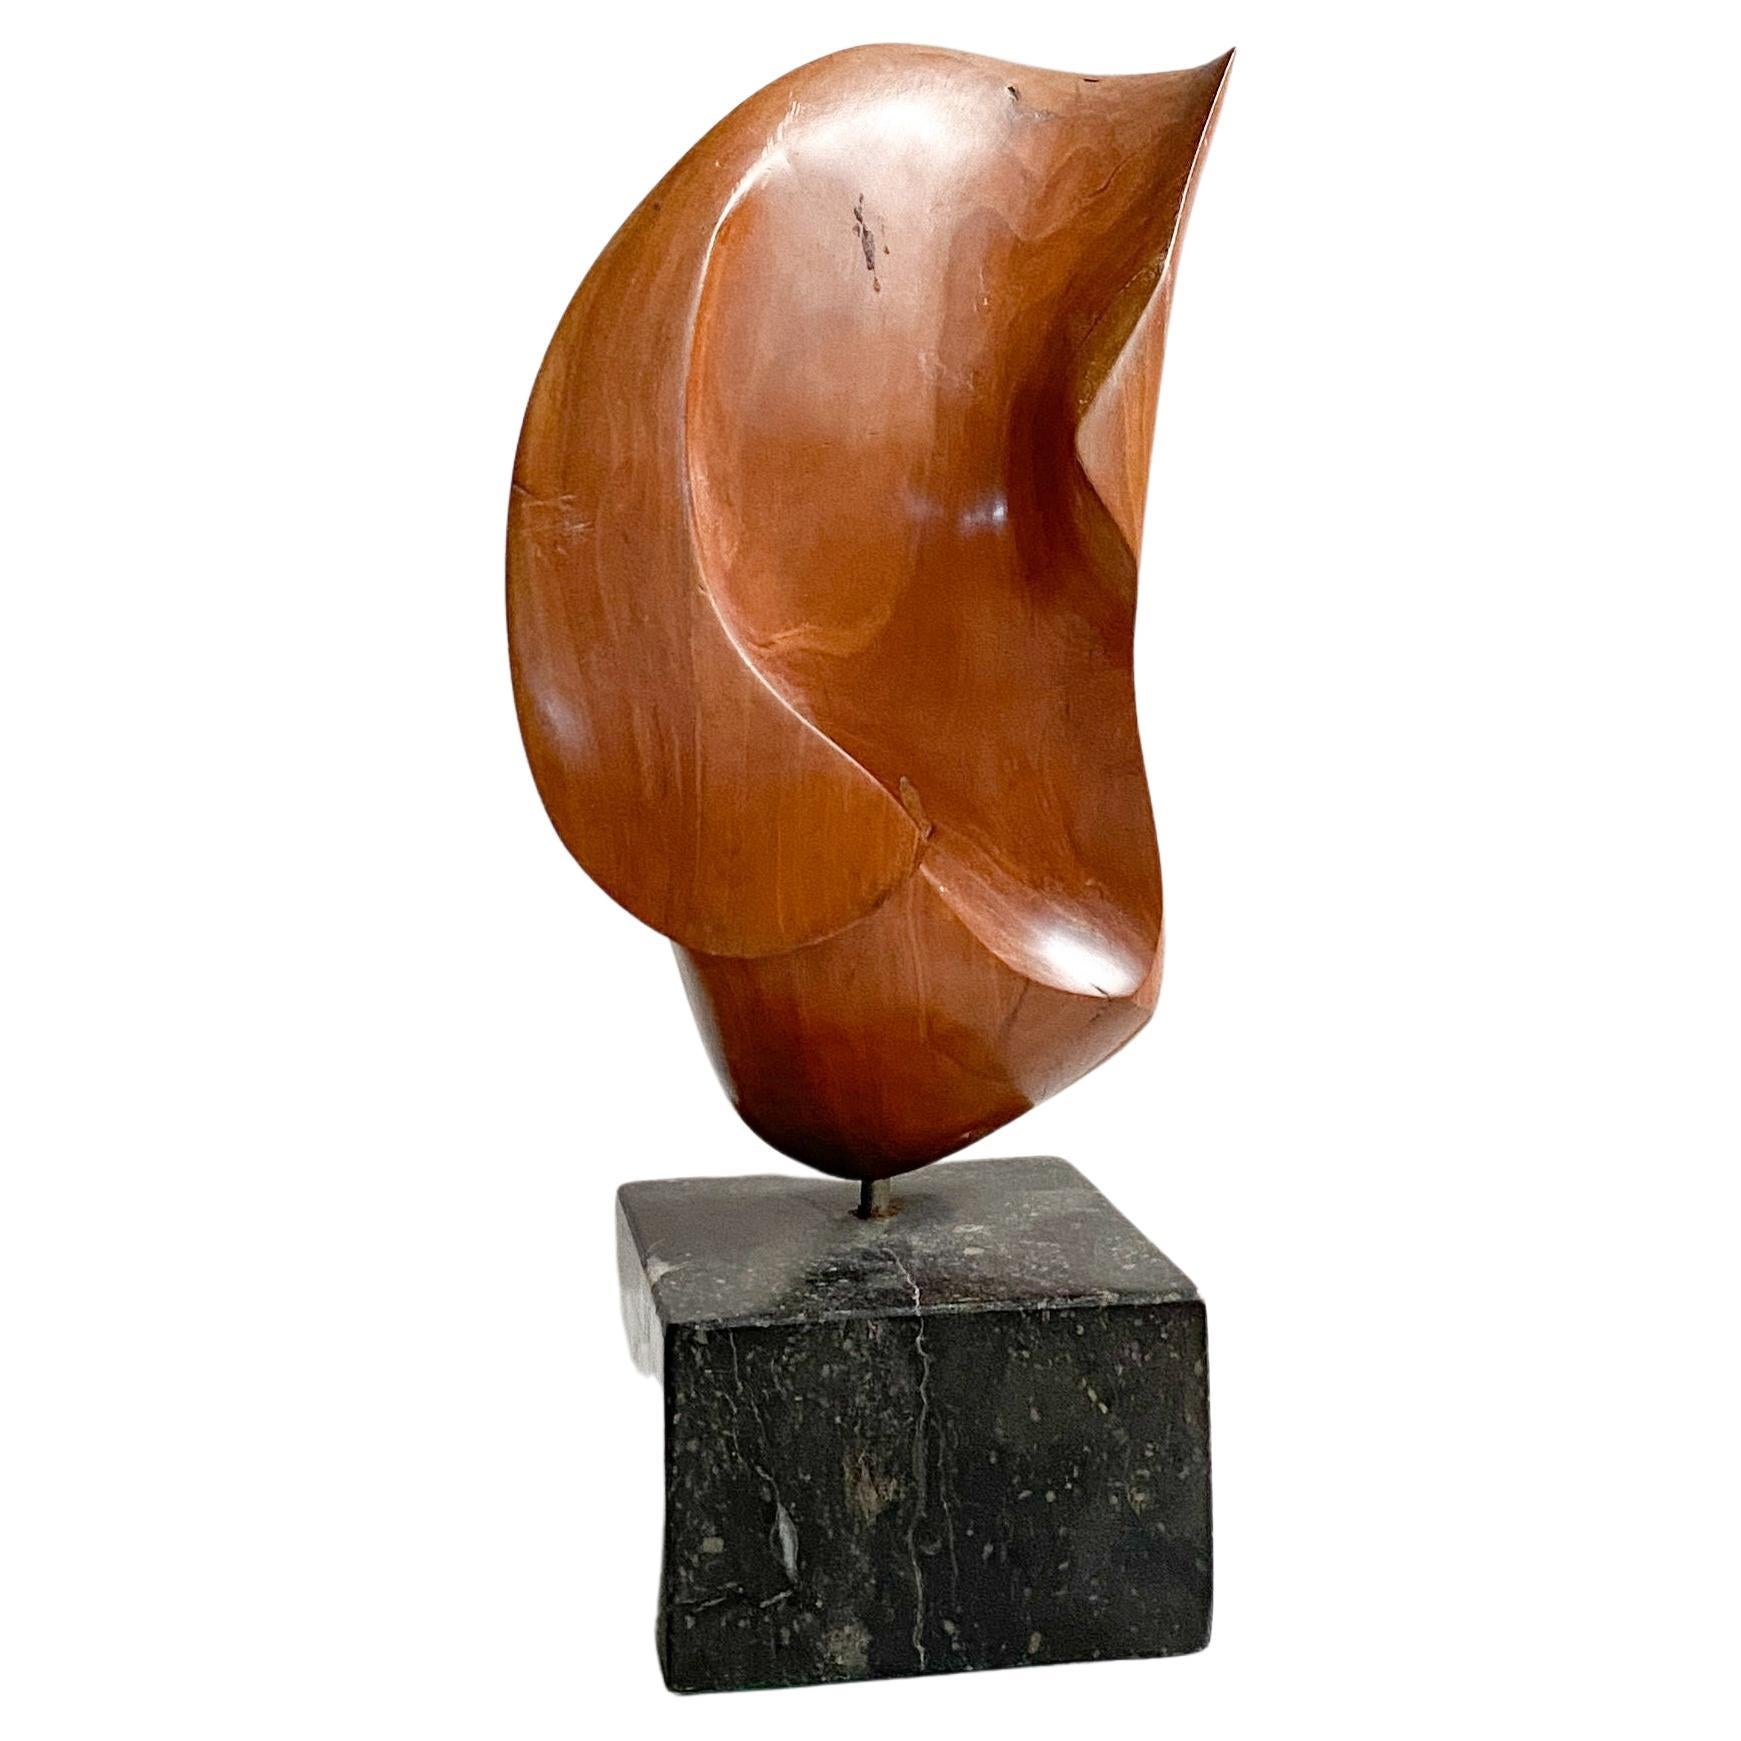 ABSTRACT MODERNIST hand carved WOODEN SCULPTURE, 1970S WAVE